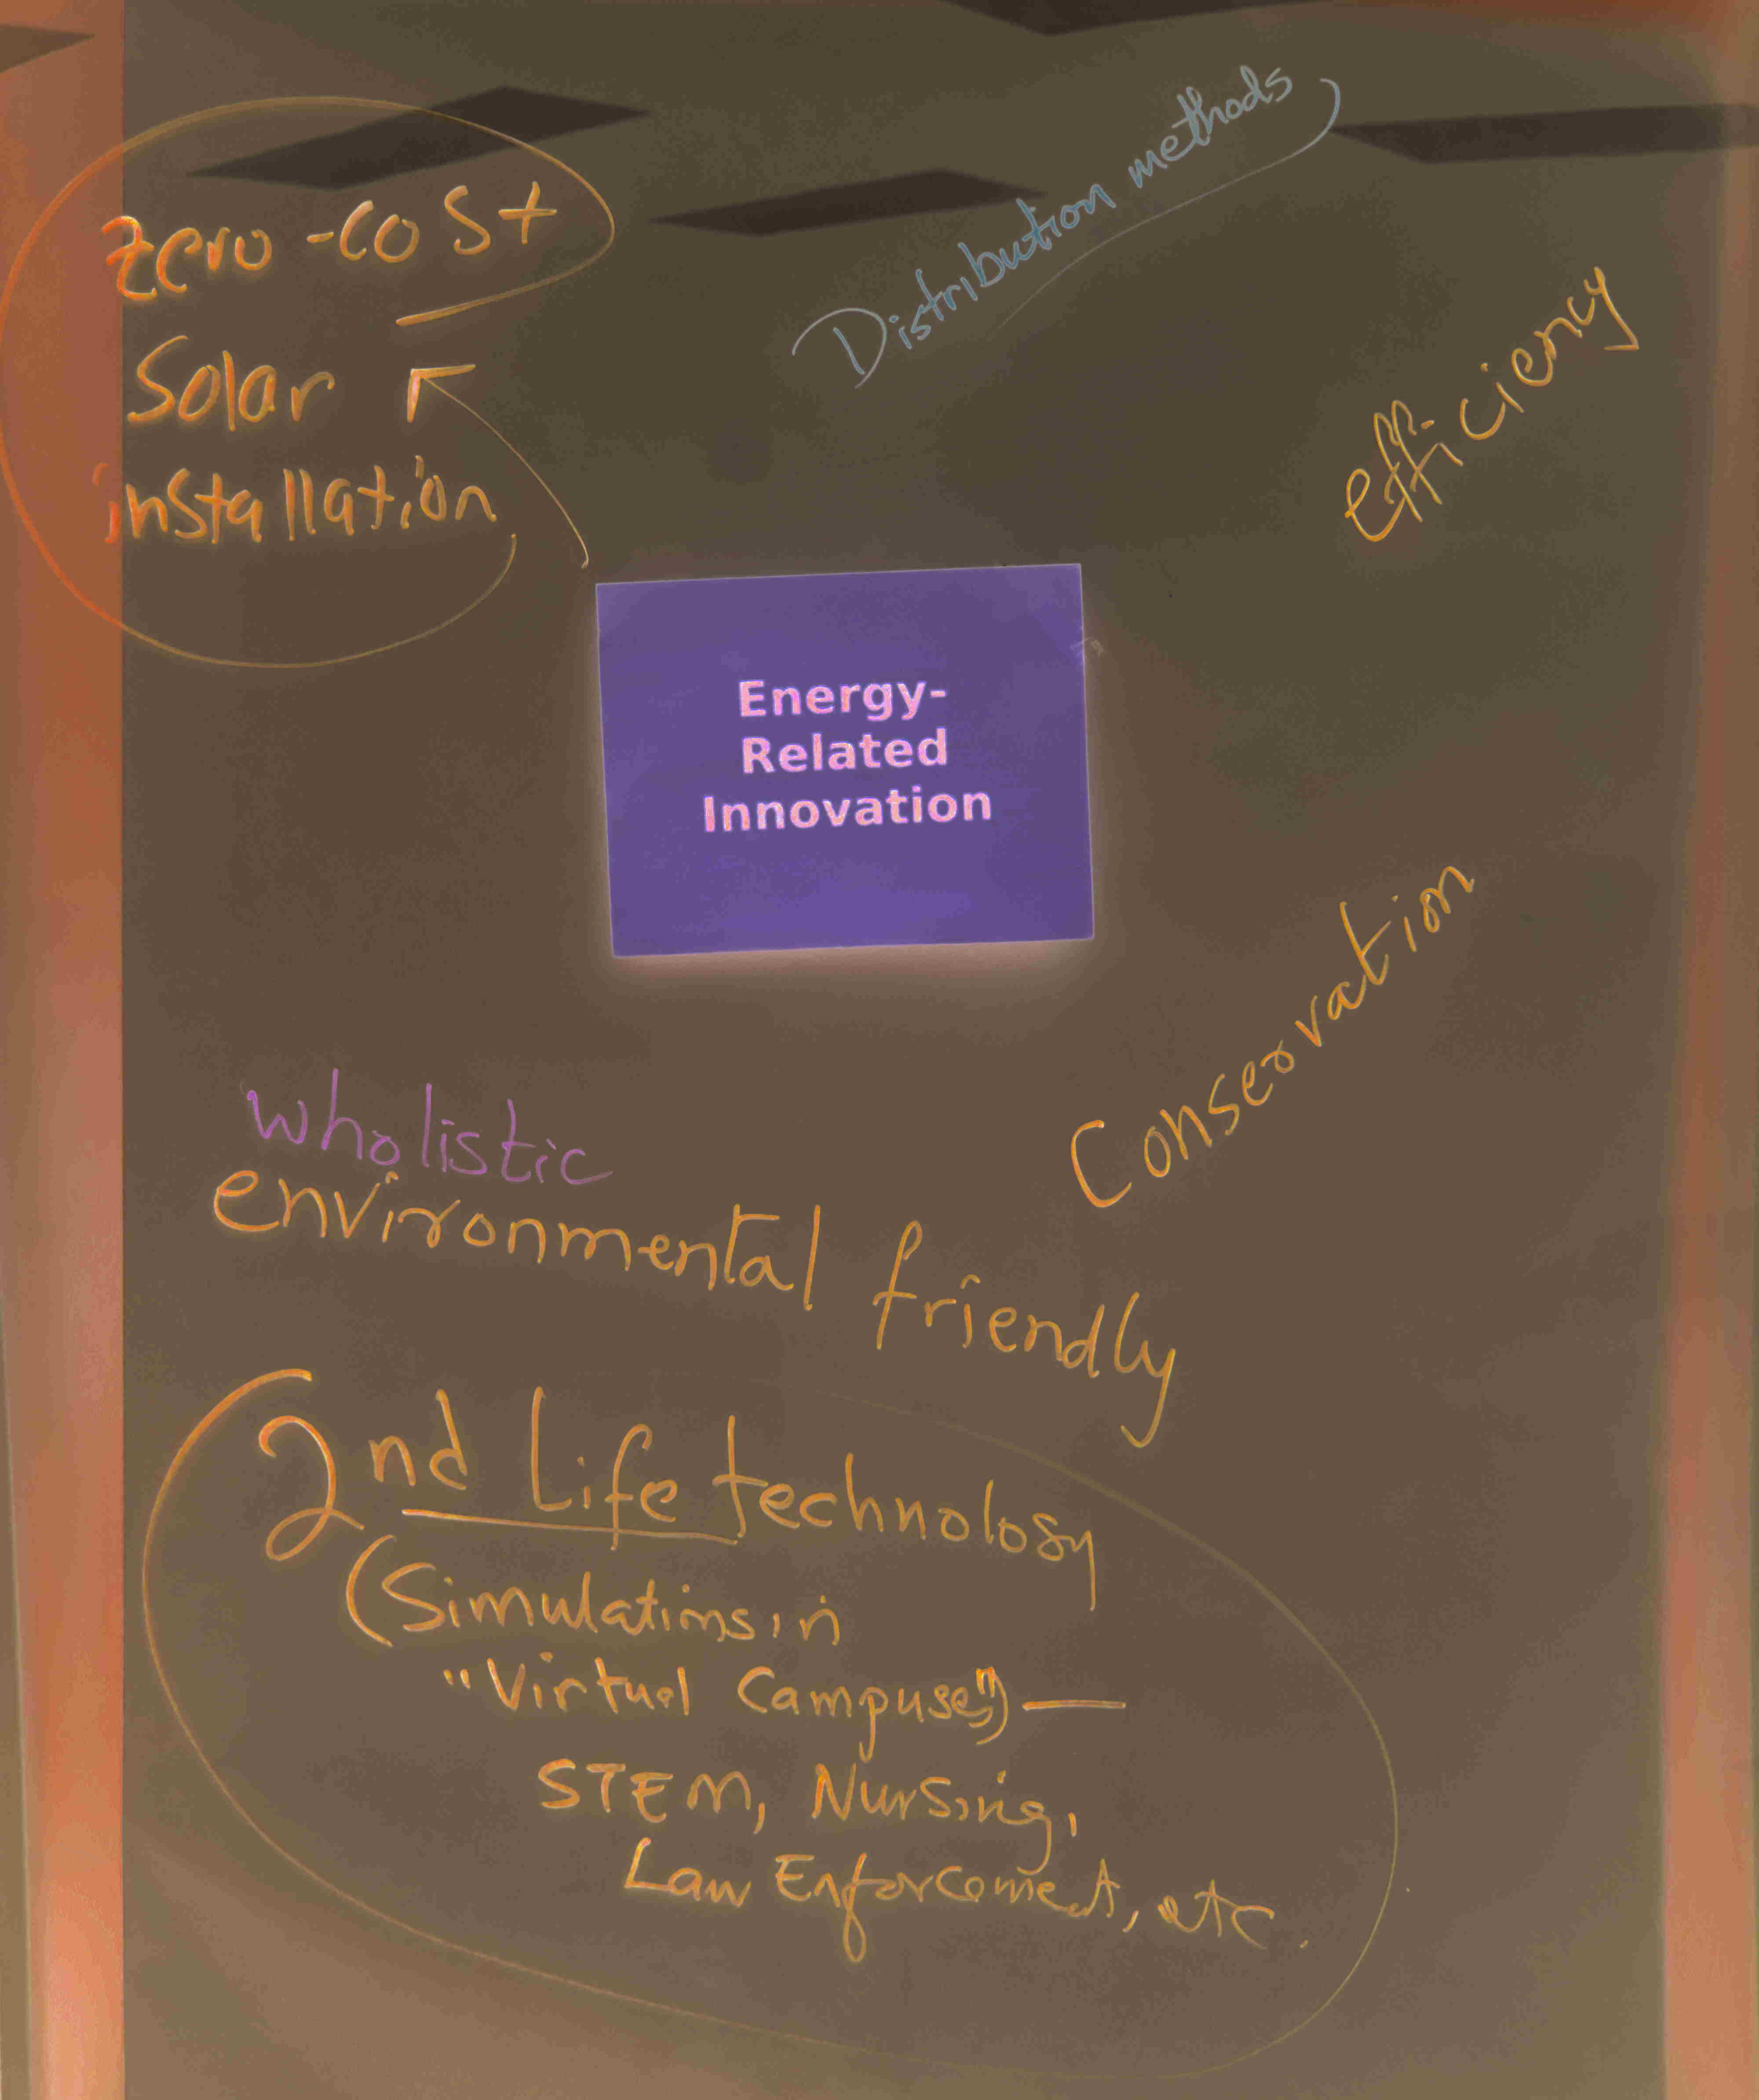 Mind-map ideas related to Energy Inovation contributed by guests